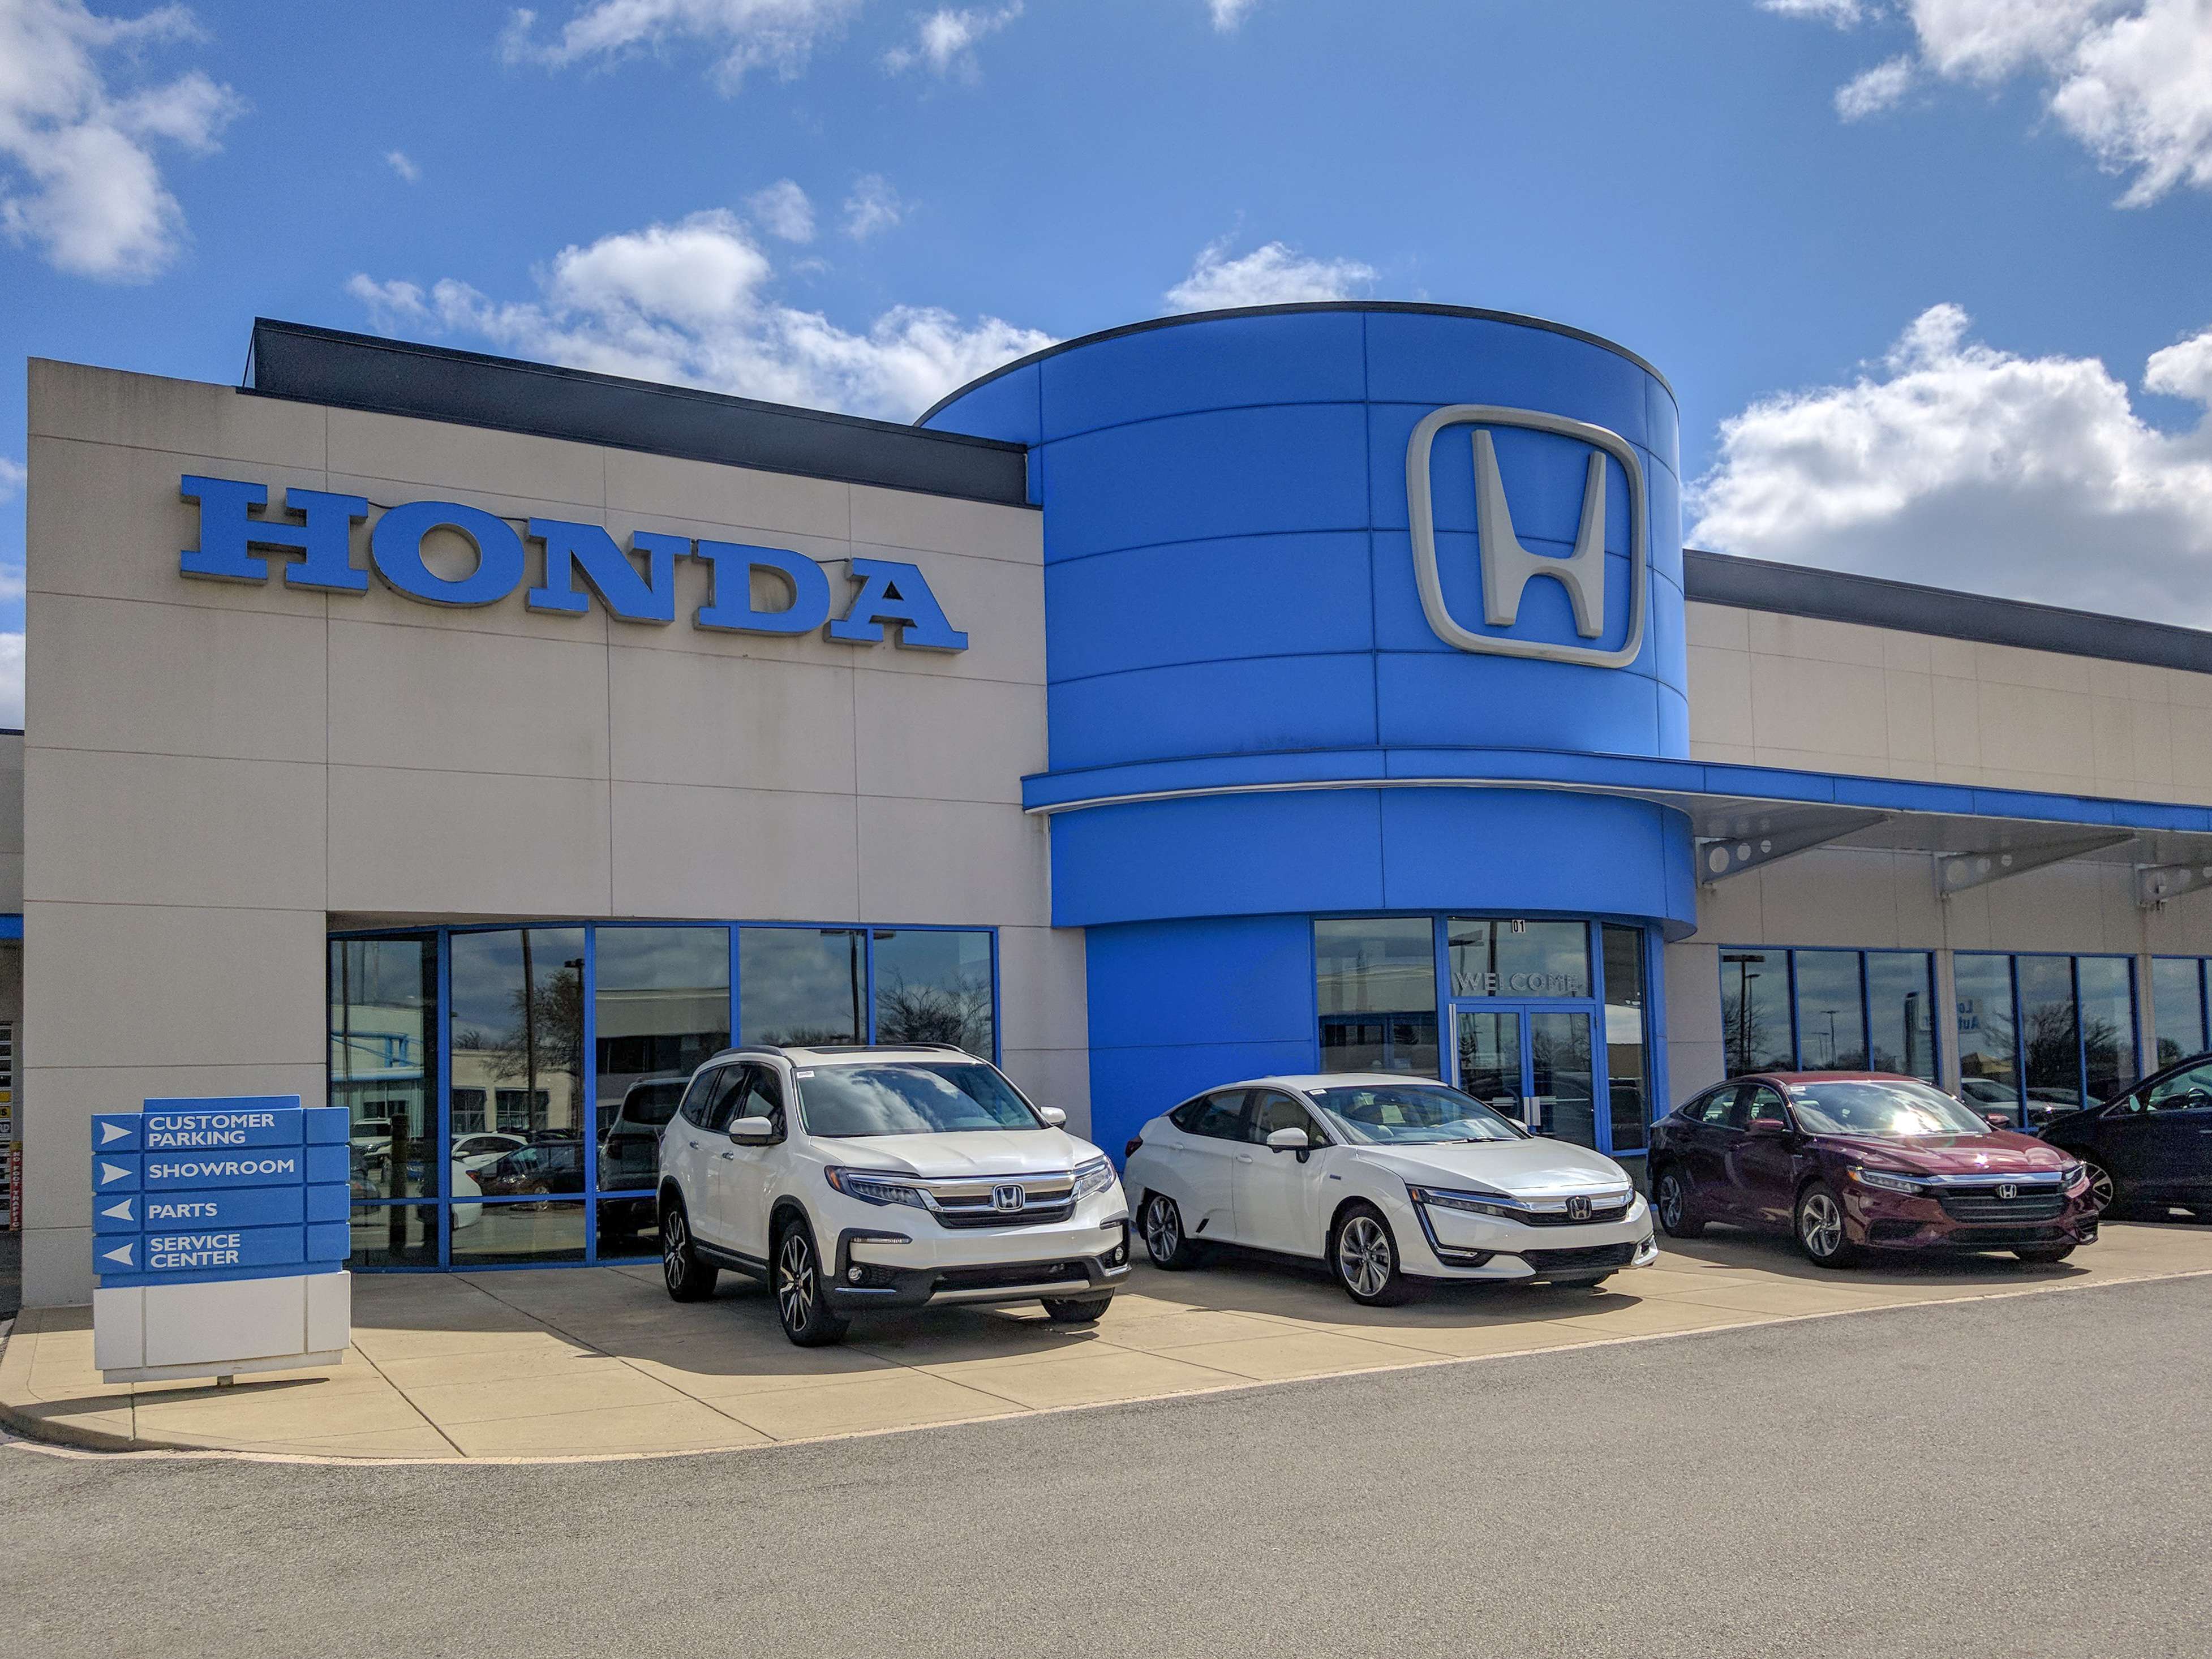 Don't miss out on the brand new 2022 Honda Pilot at Louisville Honda World.